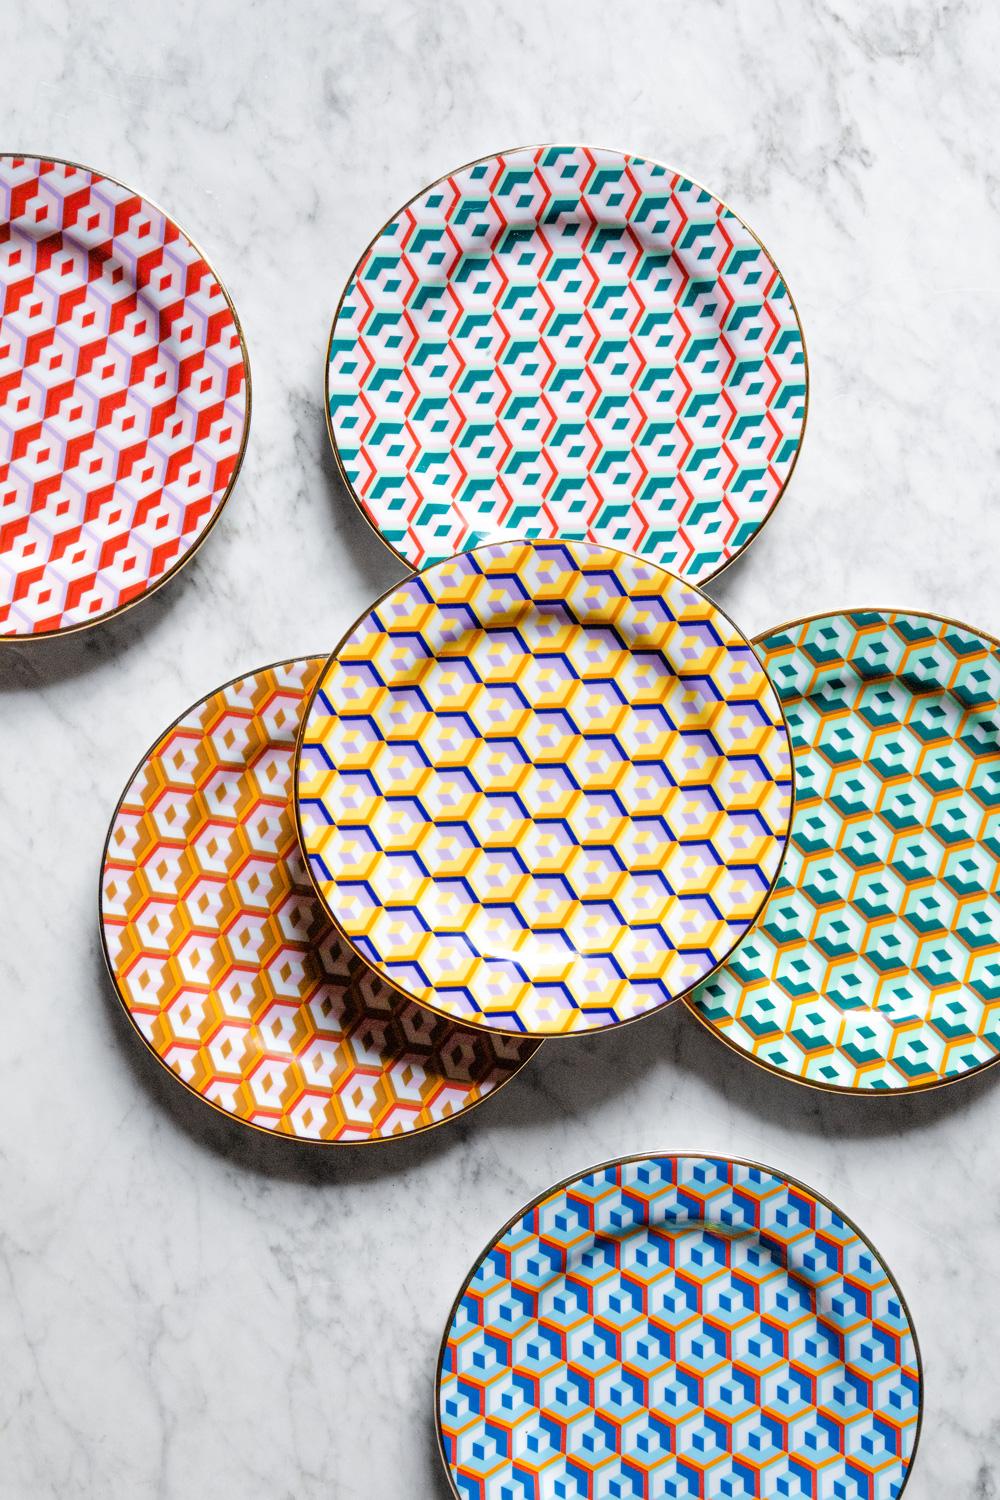 Part of our ravishingly retro collaboration with 1stDibs, this set-of-two dessert plates arrives in the vintage Cubi Blu print crafted from fine porcelain by our historic Italian partners, Ancap. The 1stDibs collection offers six different color